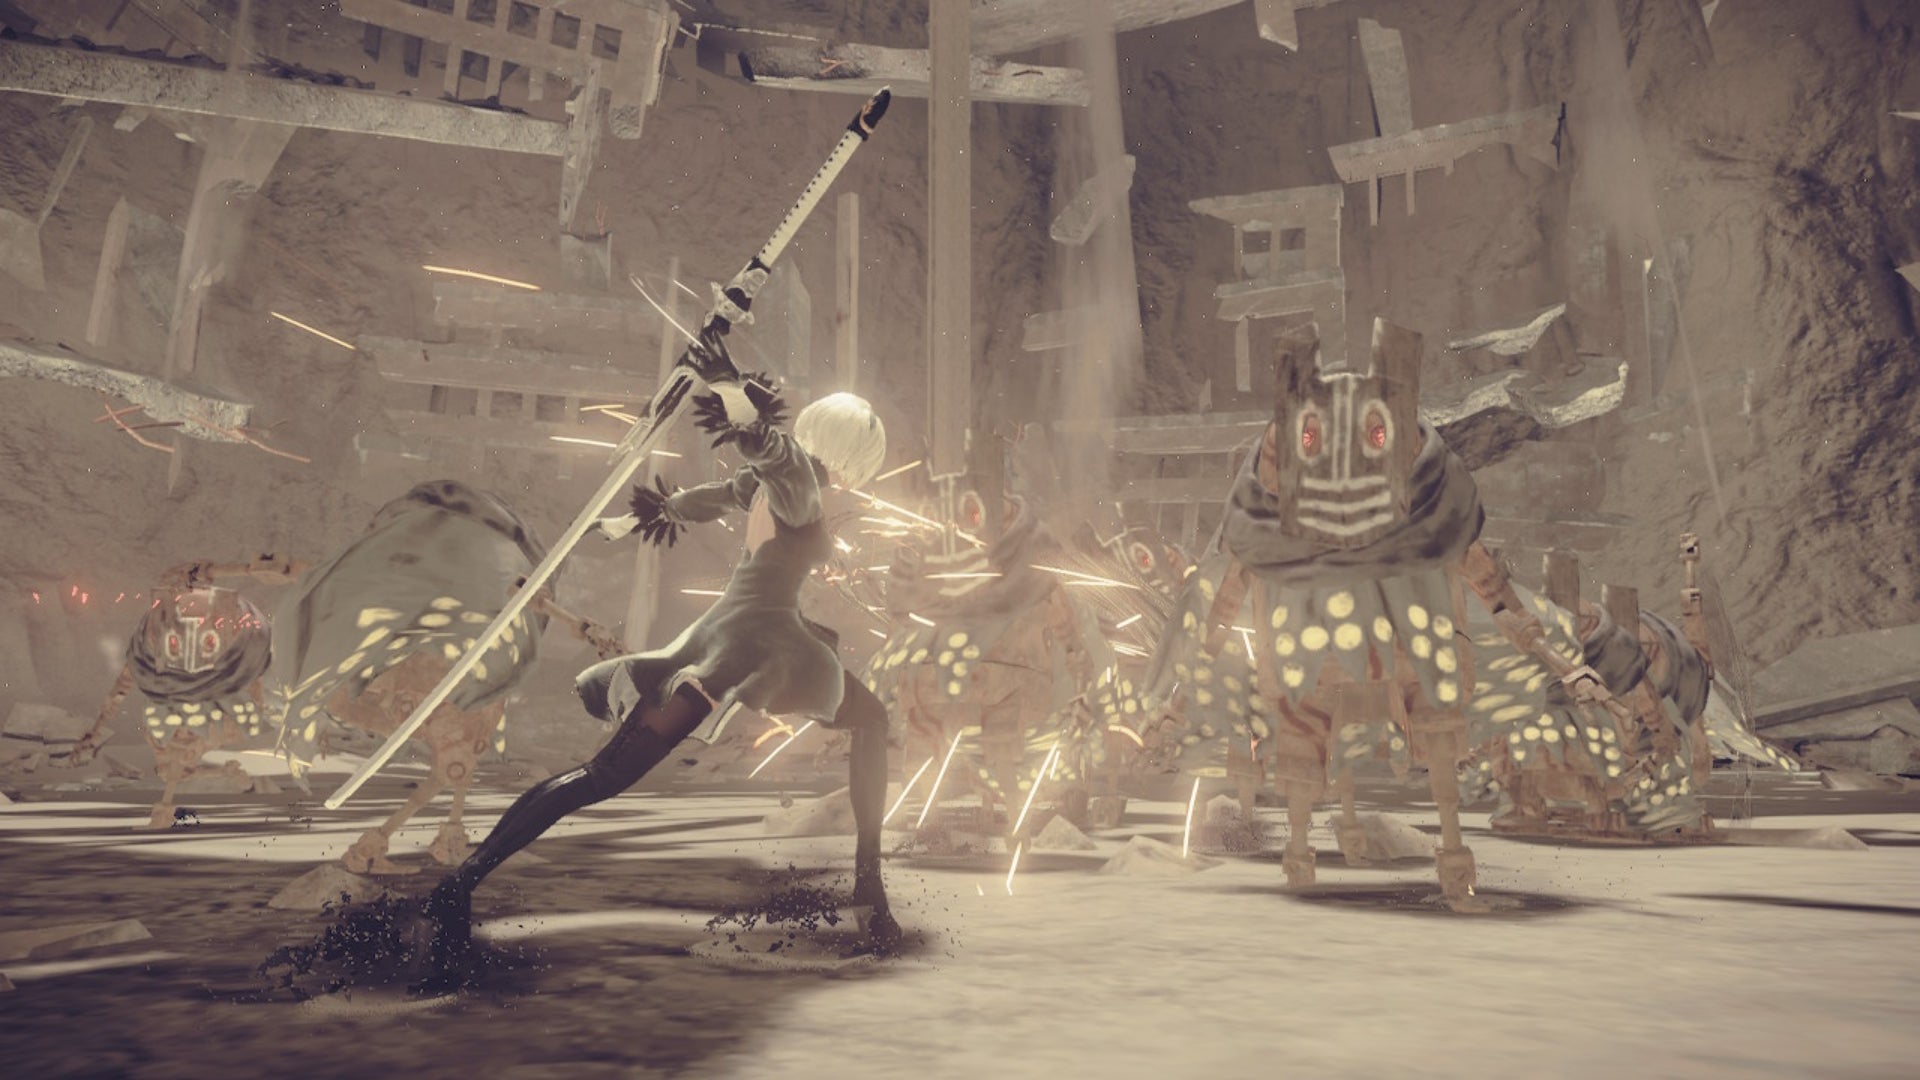 Nier Replicant's creators on little changes that make a big difference -  Polygon